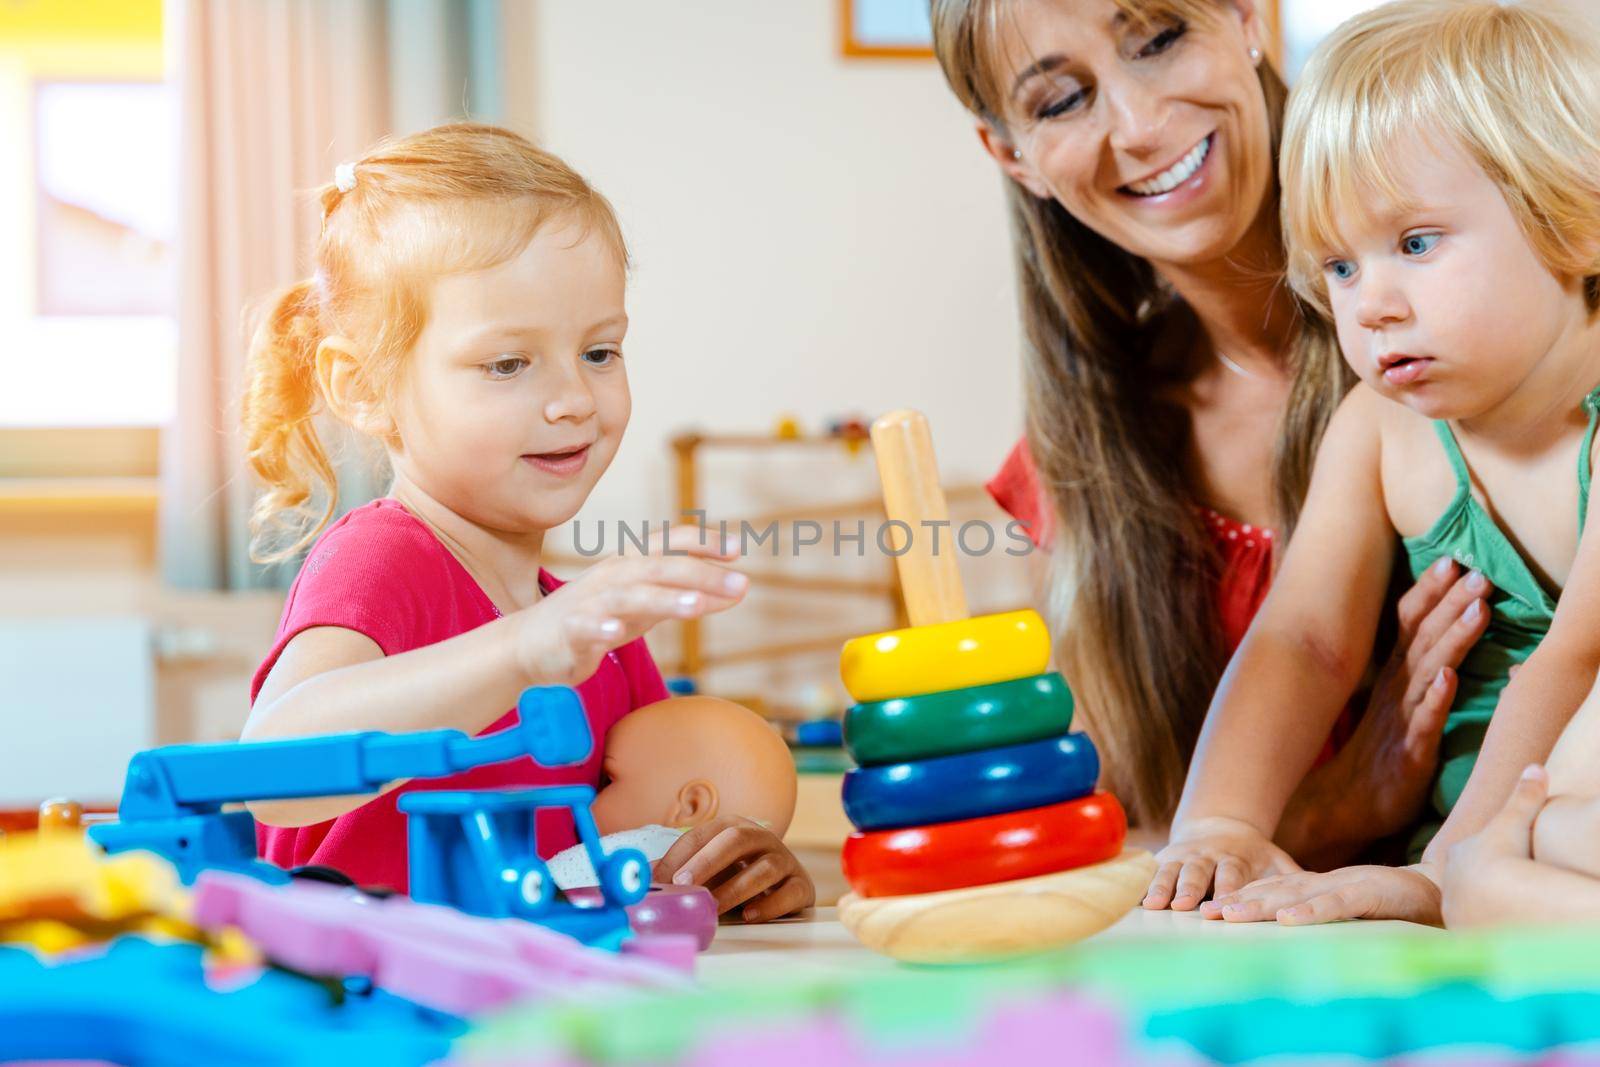 Children in nursery school learning and playing by Kzenon